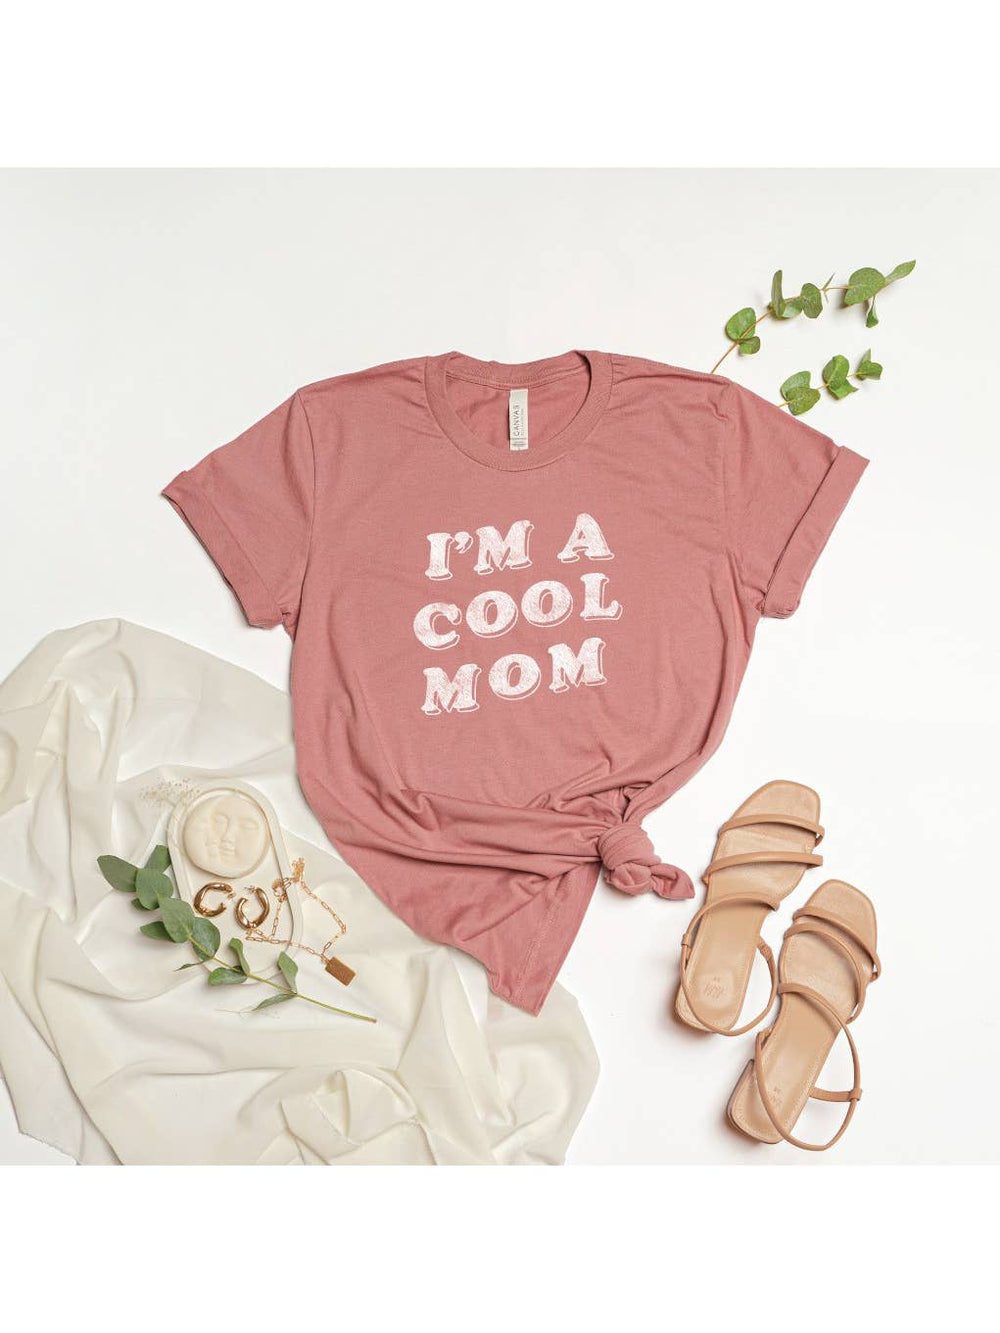 I'm A Cool Mom Graphic T-Shirt